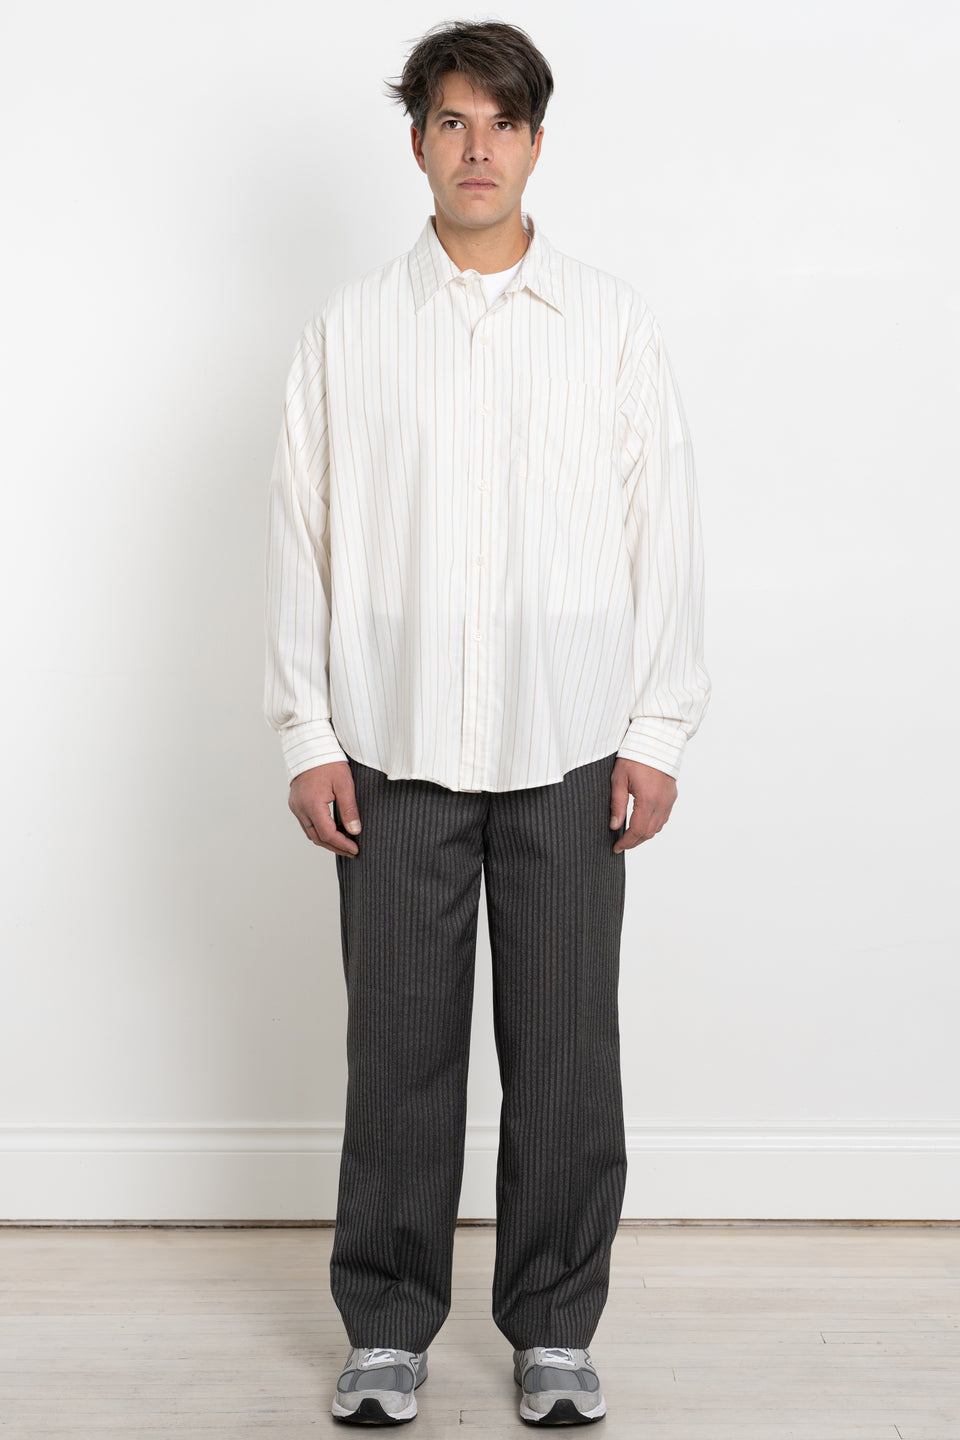 mfpen AW23 or FW23 Men's Collection Executive Shirt Beige Stripe Silk Calculus Victoria BC Canada